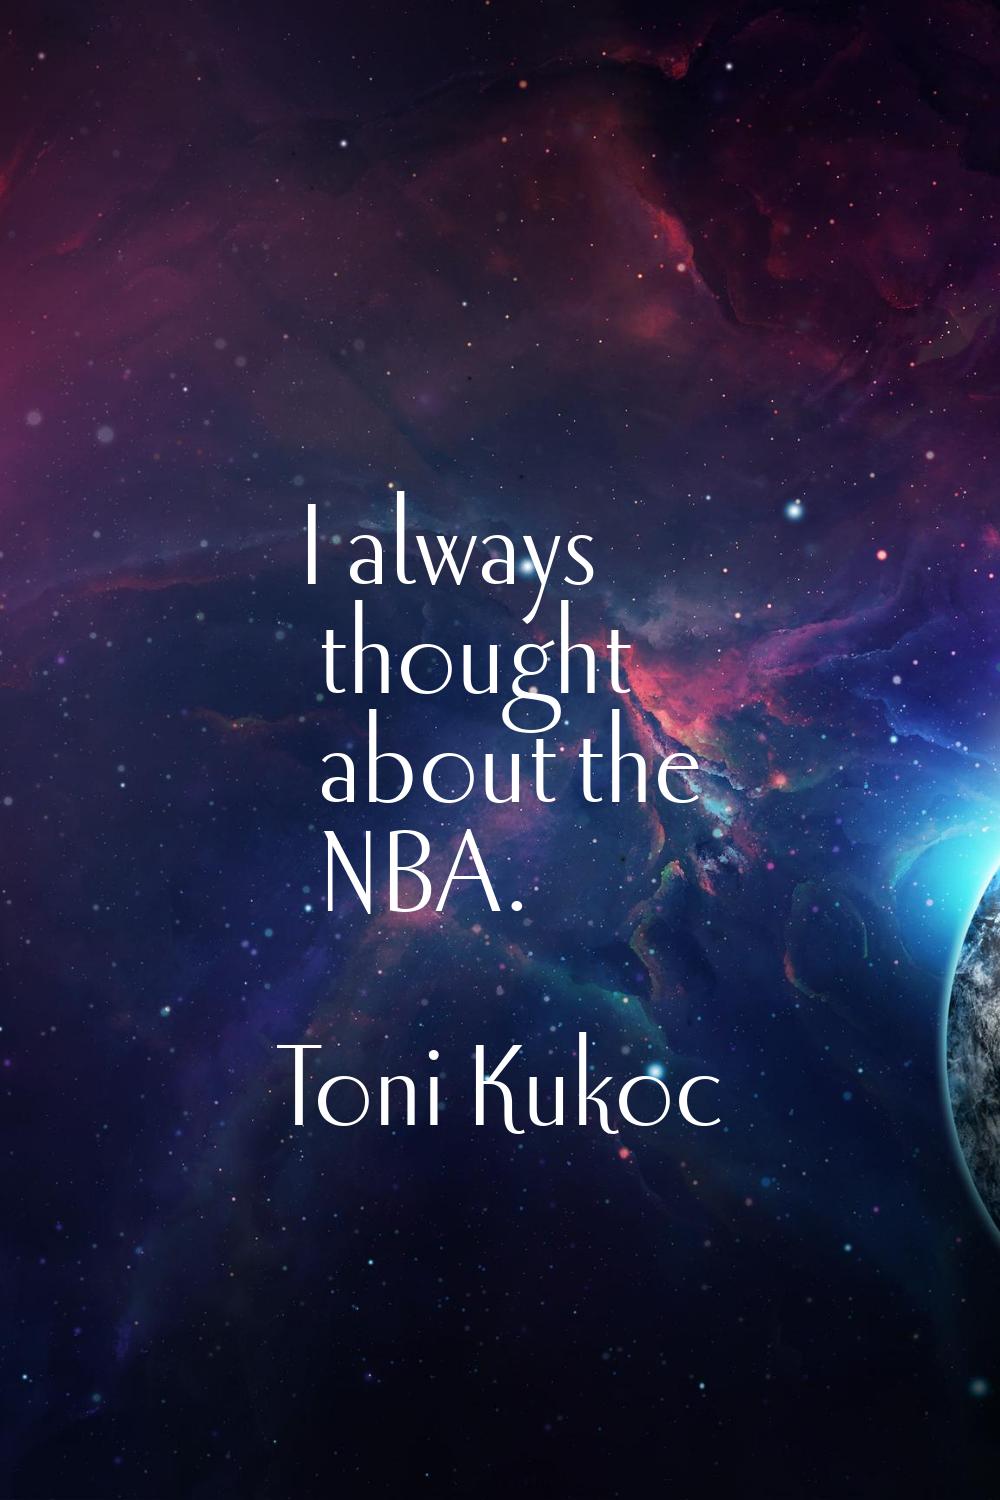 I always thought about the NBA.